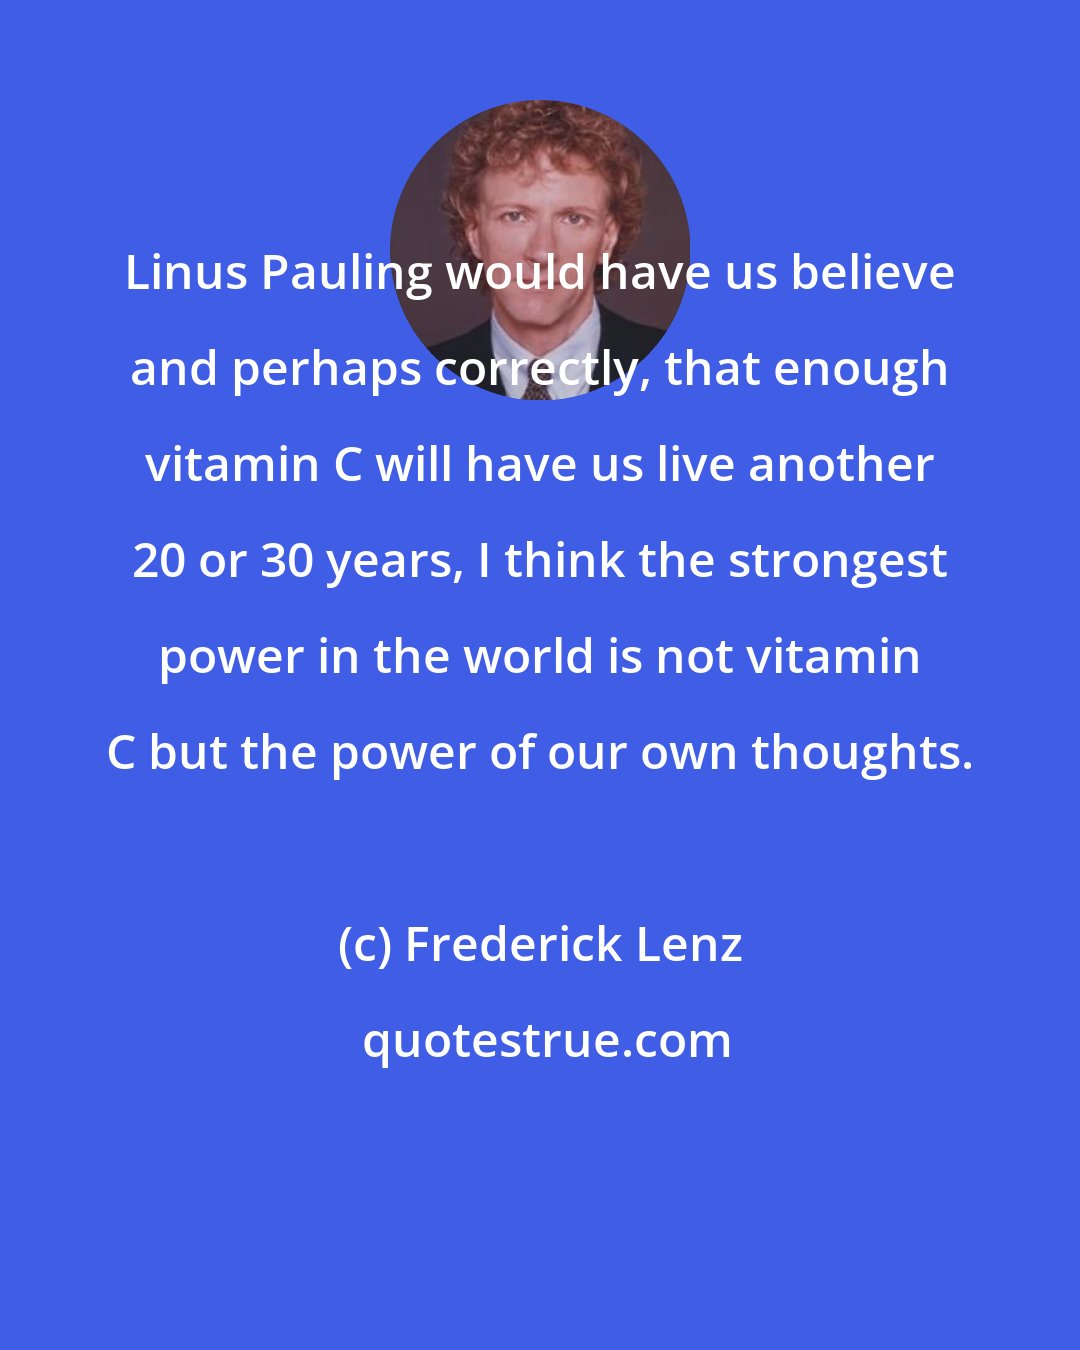 Frederick Lenz: Linus Pauling would have us believe and perhaps correctly, that enough vitamin C will have us live another 20 or 30 years, I think the strongest power in the world is not vitamin C but the power of our own thoughts.